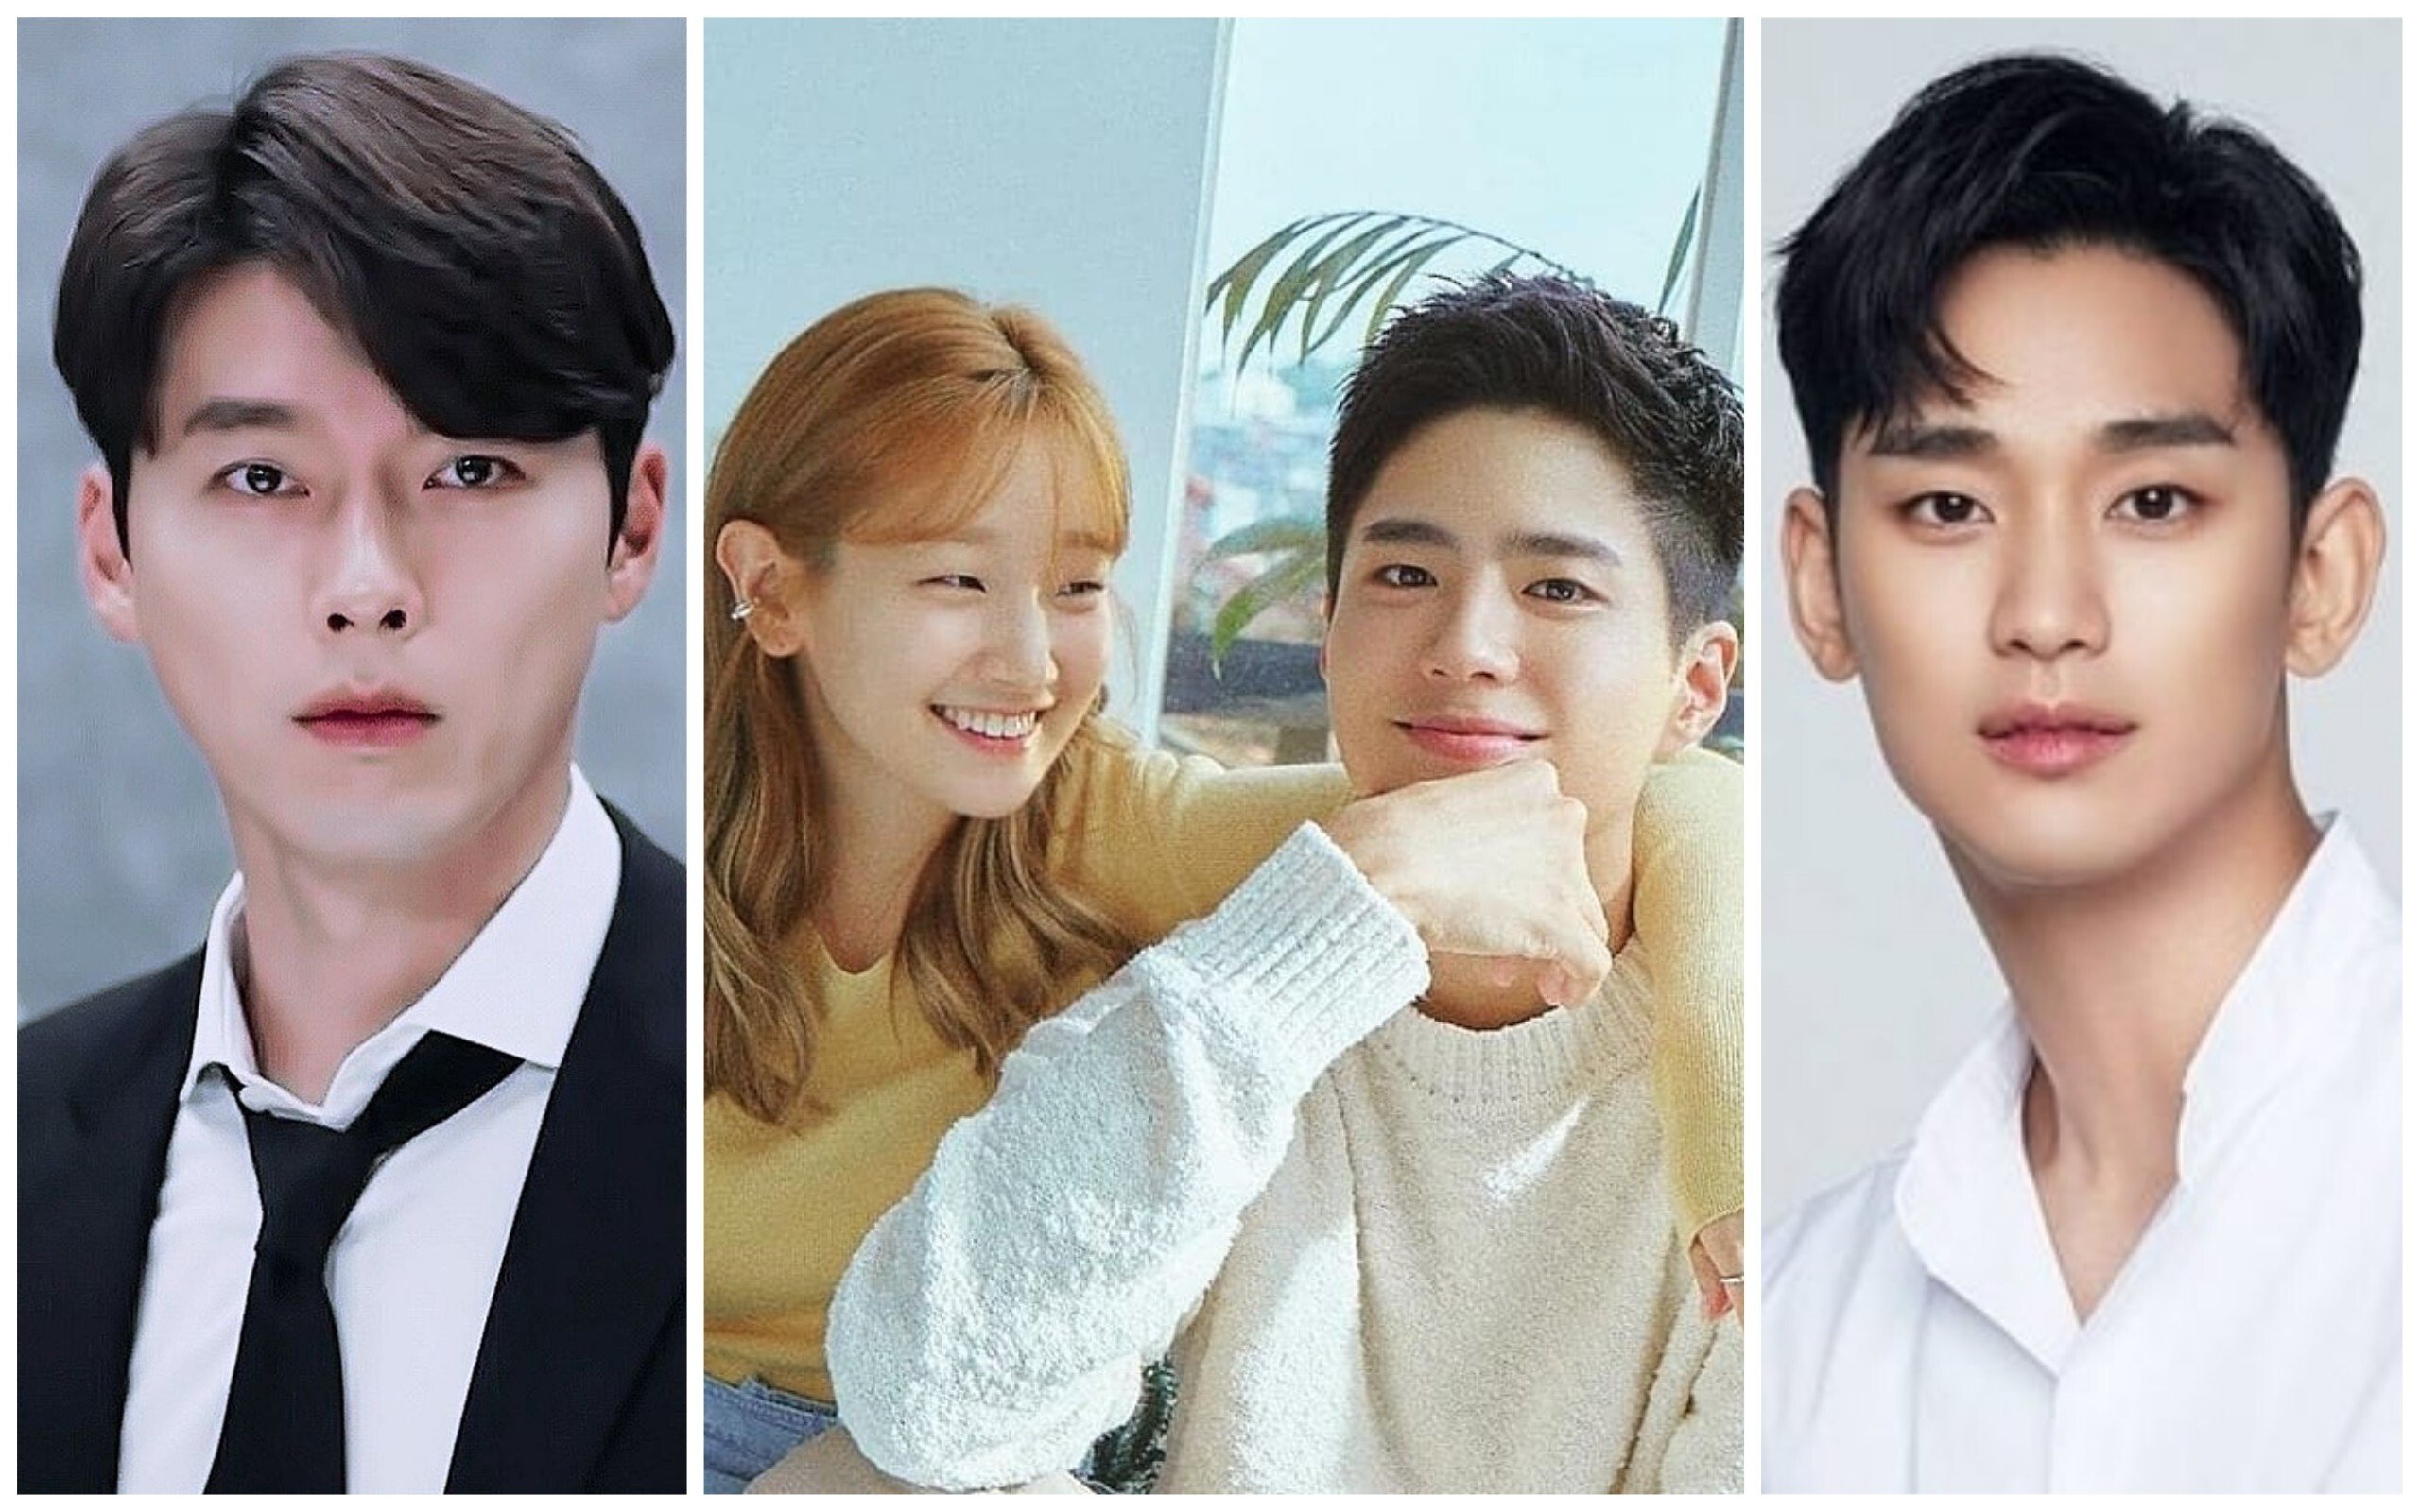 Record Of Youth': everything you need to know about the Korean drama